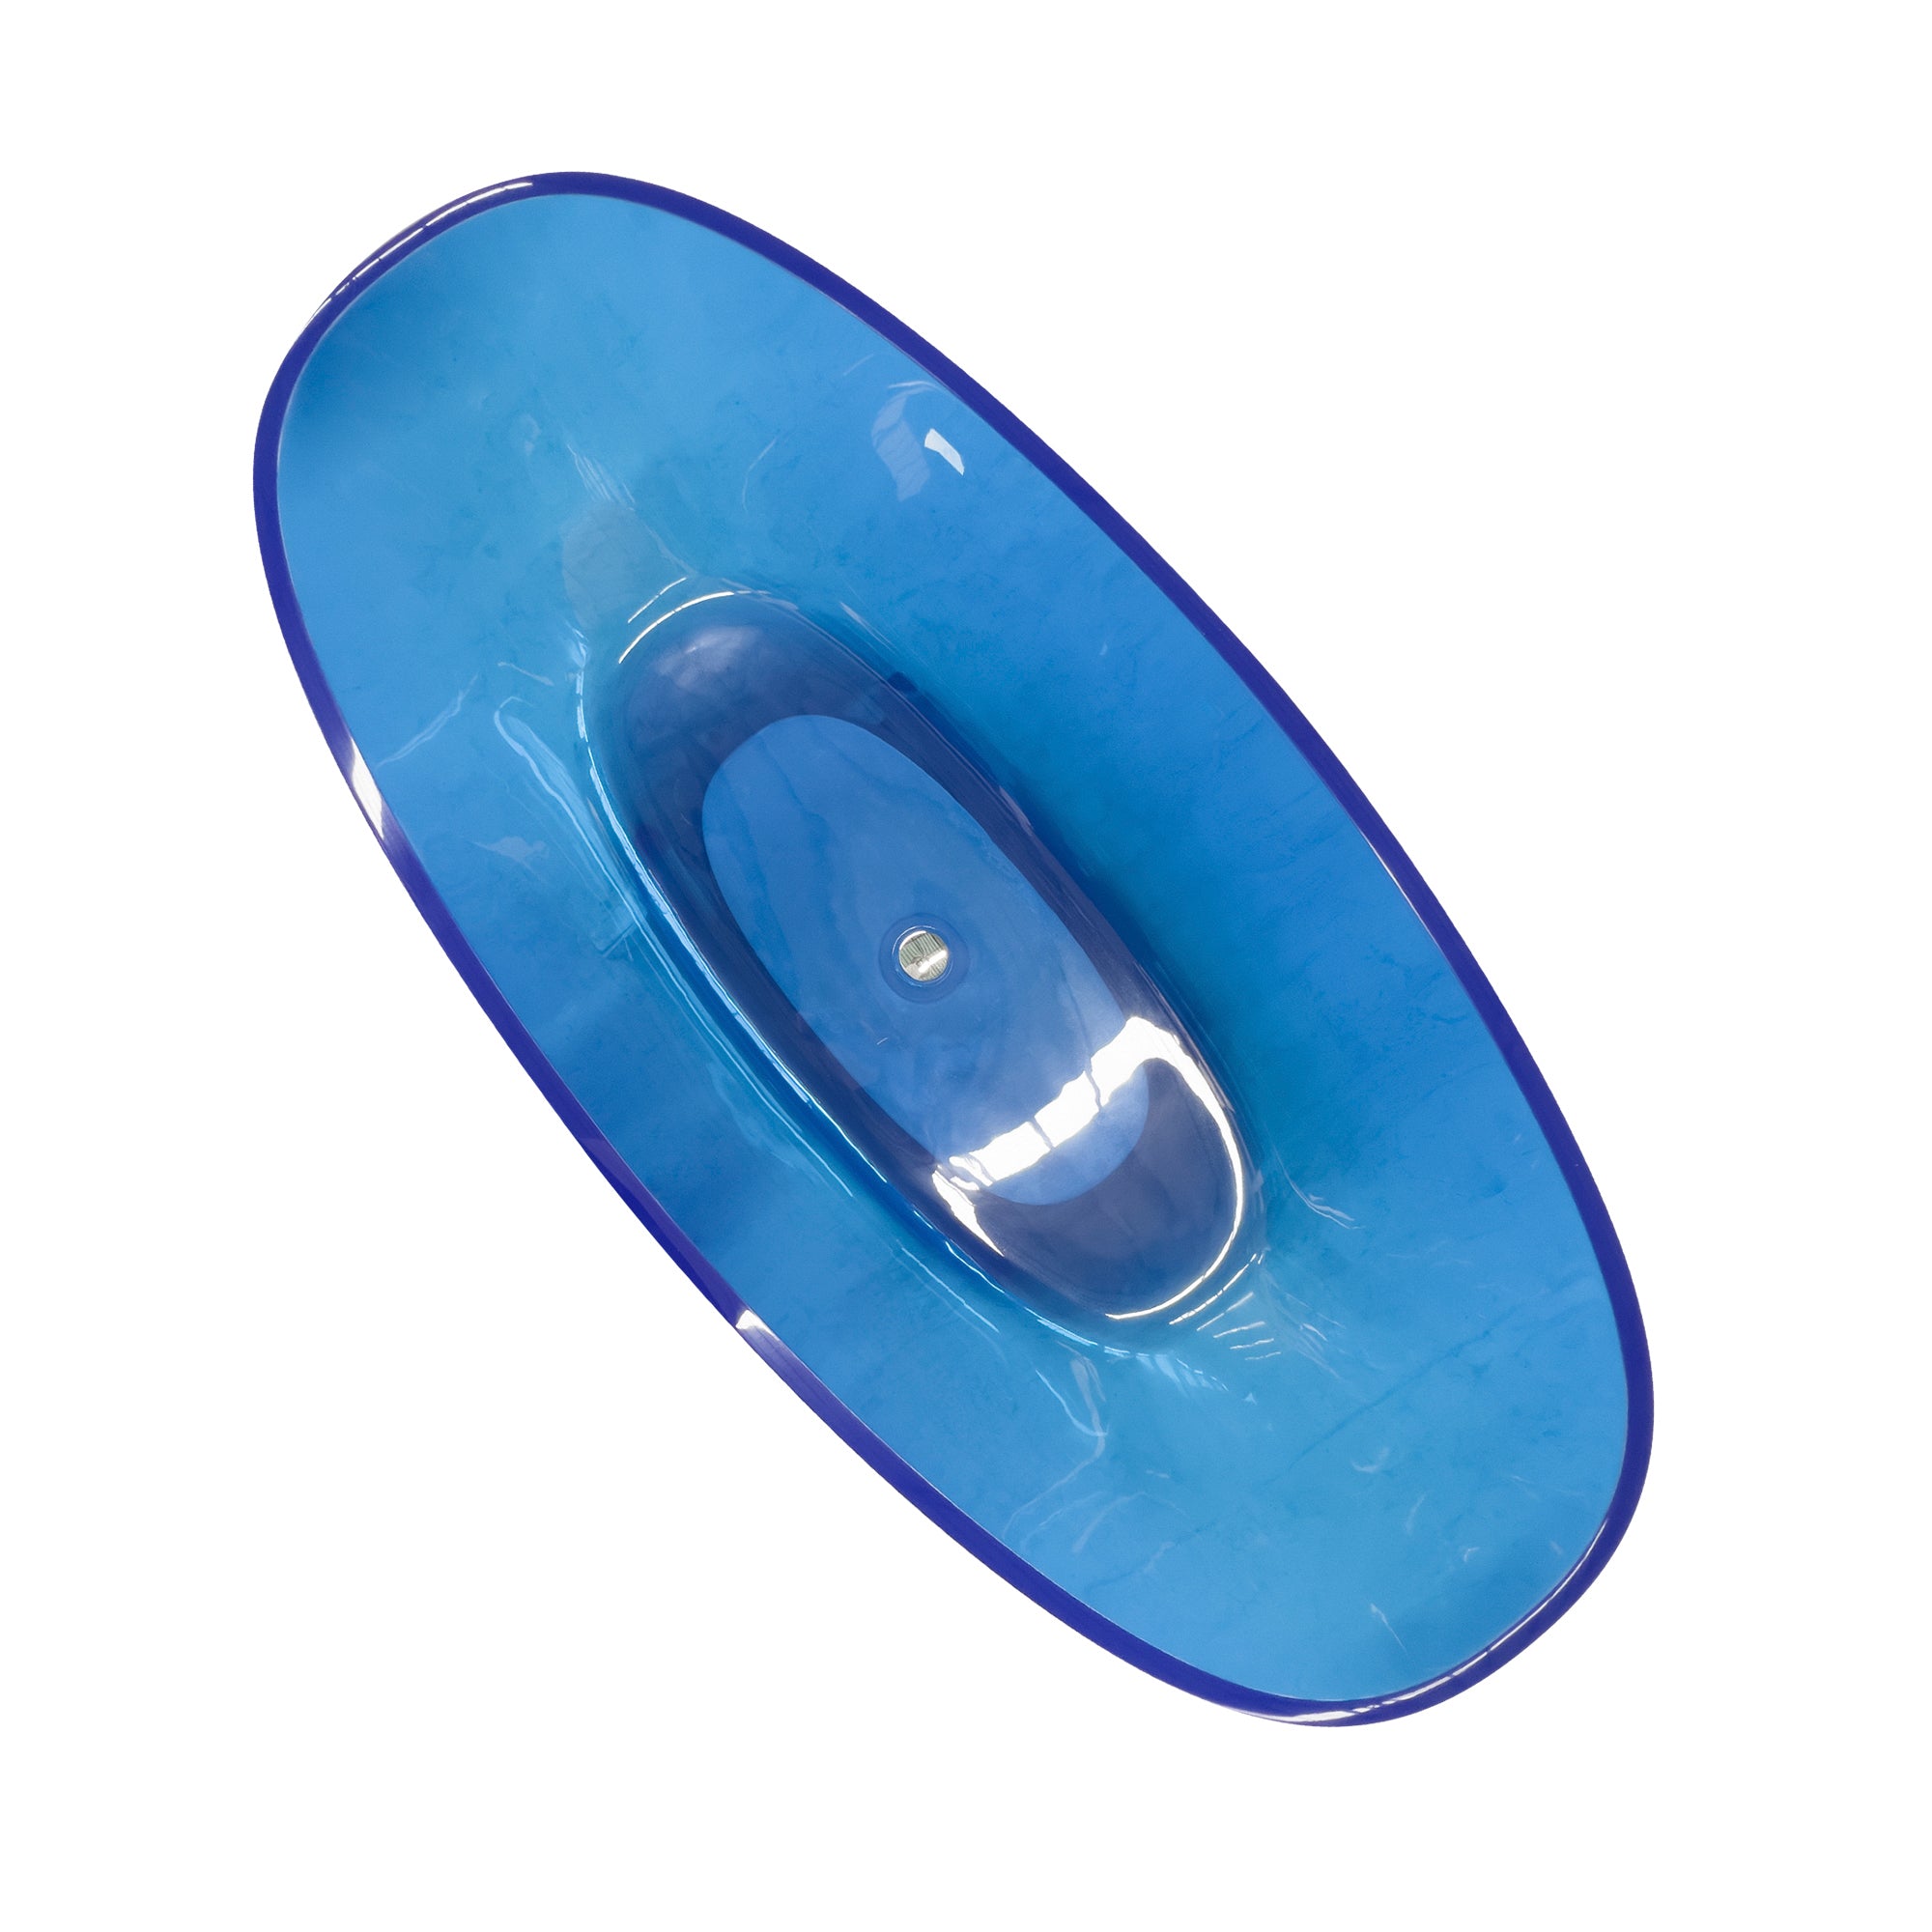 64" Oval Shaped Freestanding Solid Surface Soaking Bathtub in Transparent Blue RX-S02-64TBU